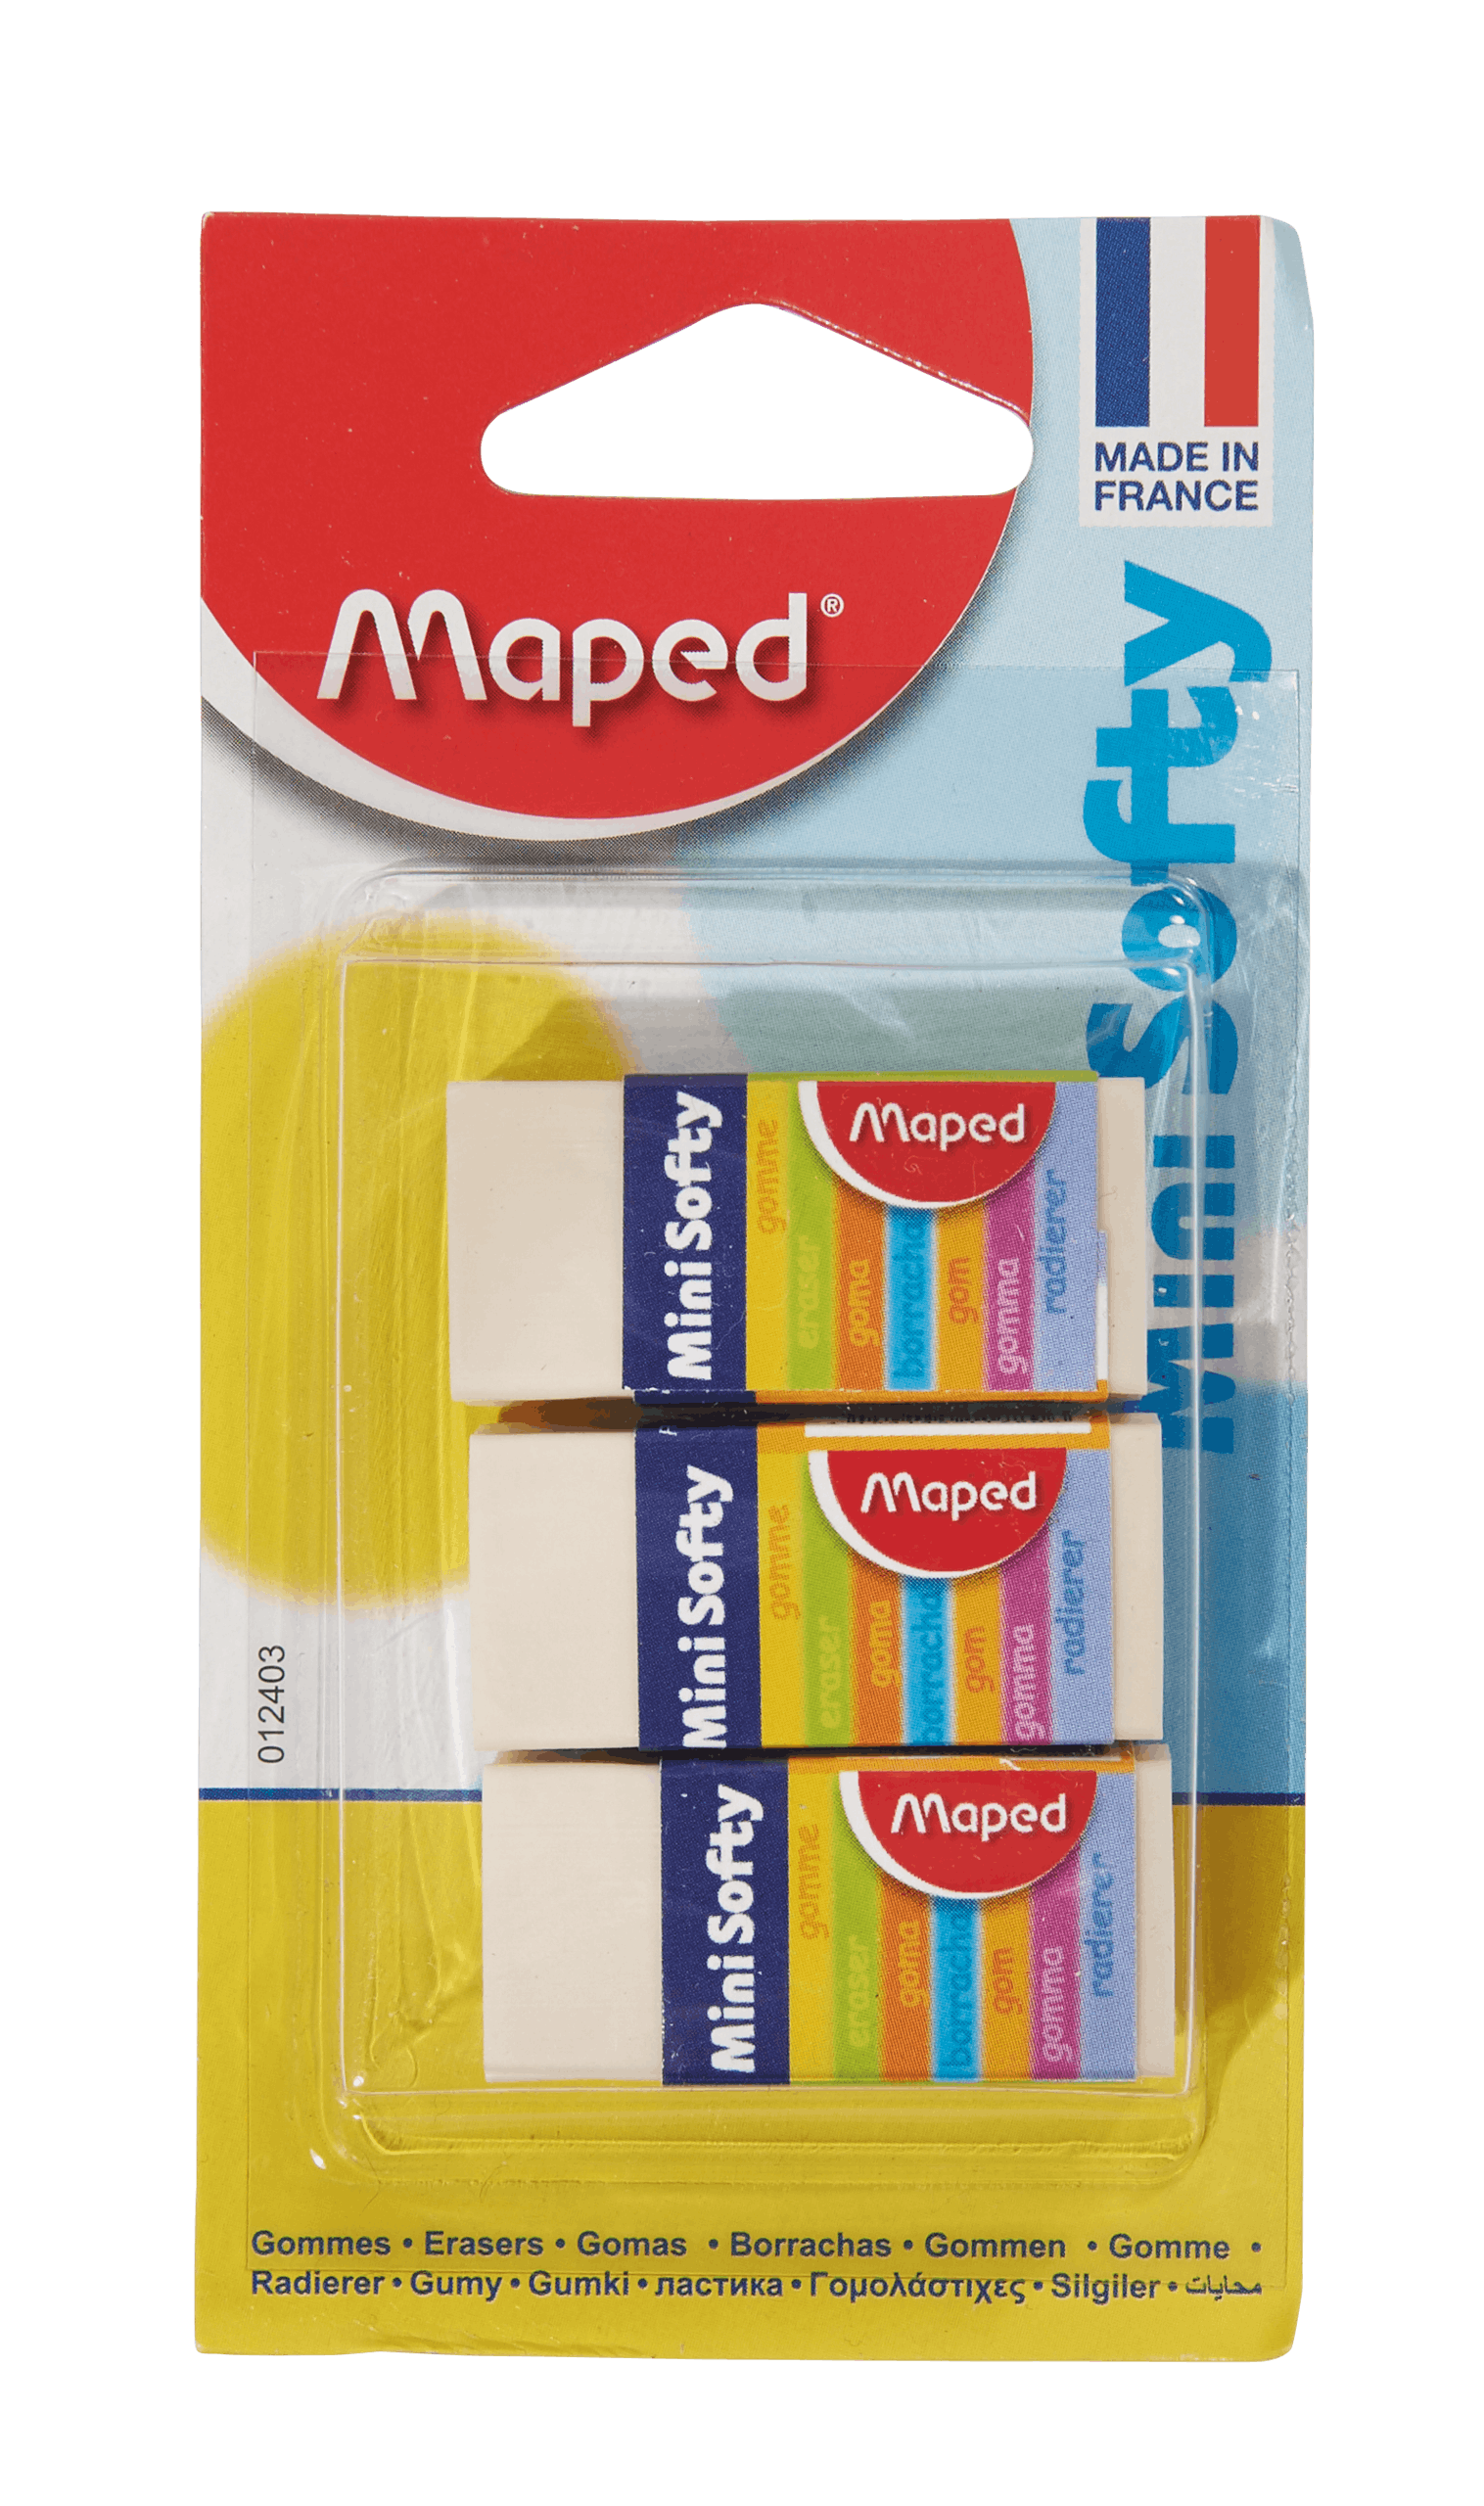 Papeterie: Maped 3 gommes Softy mini